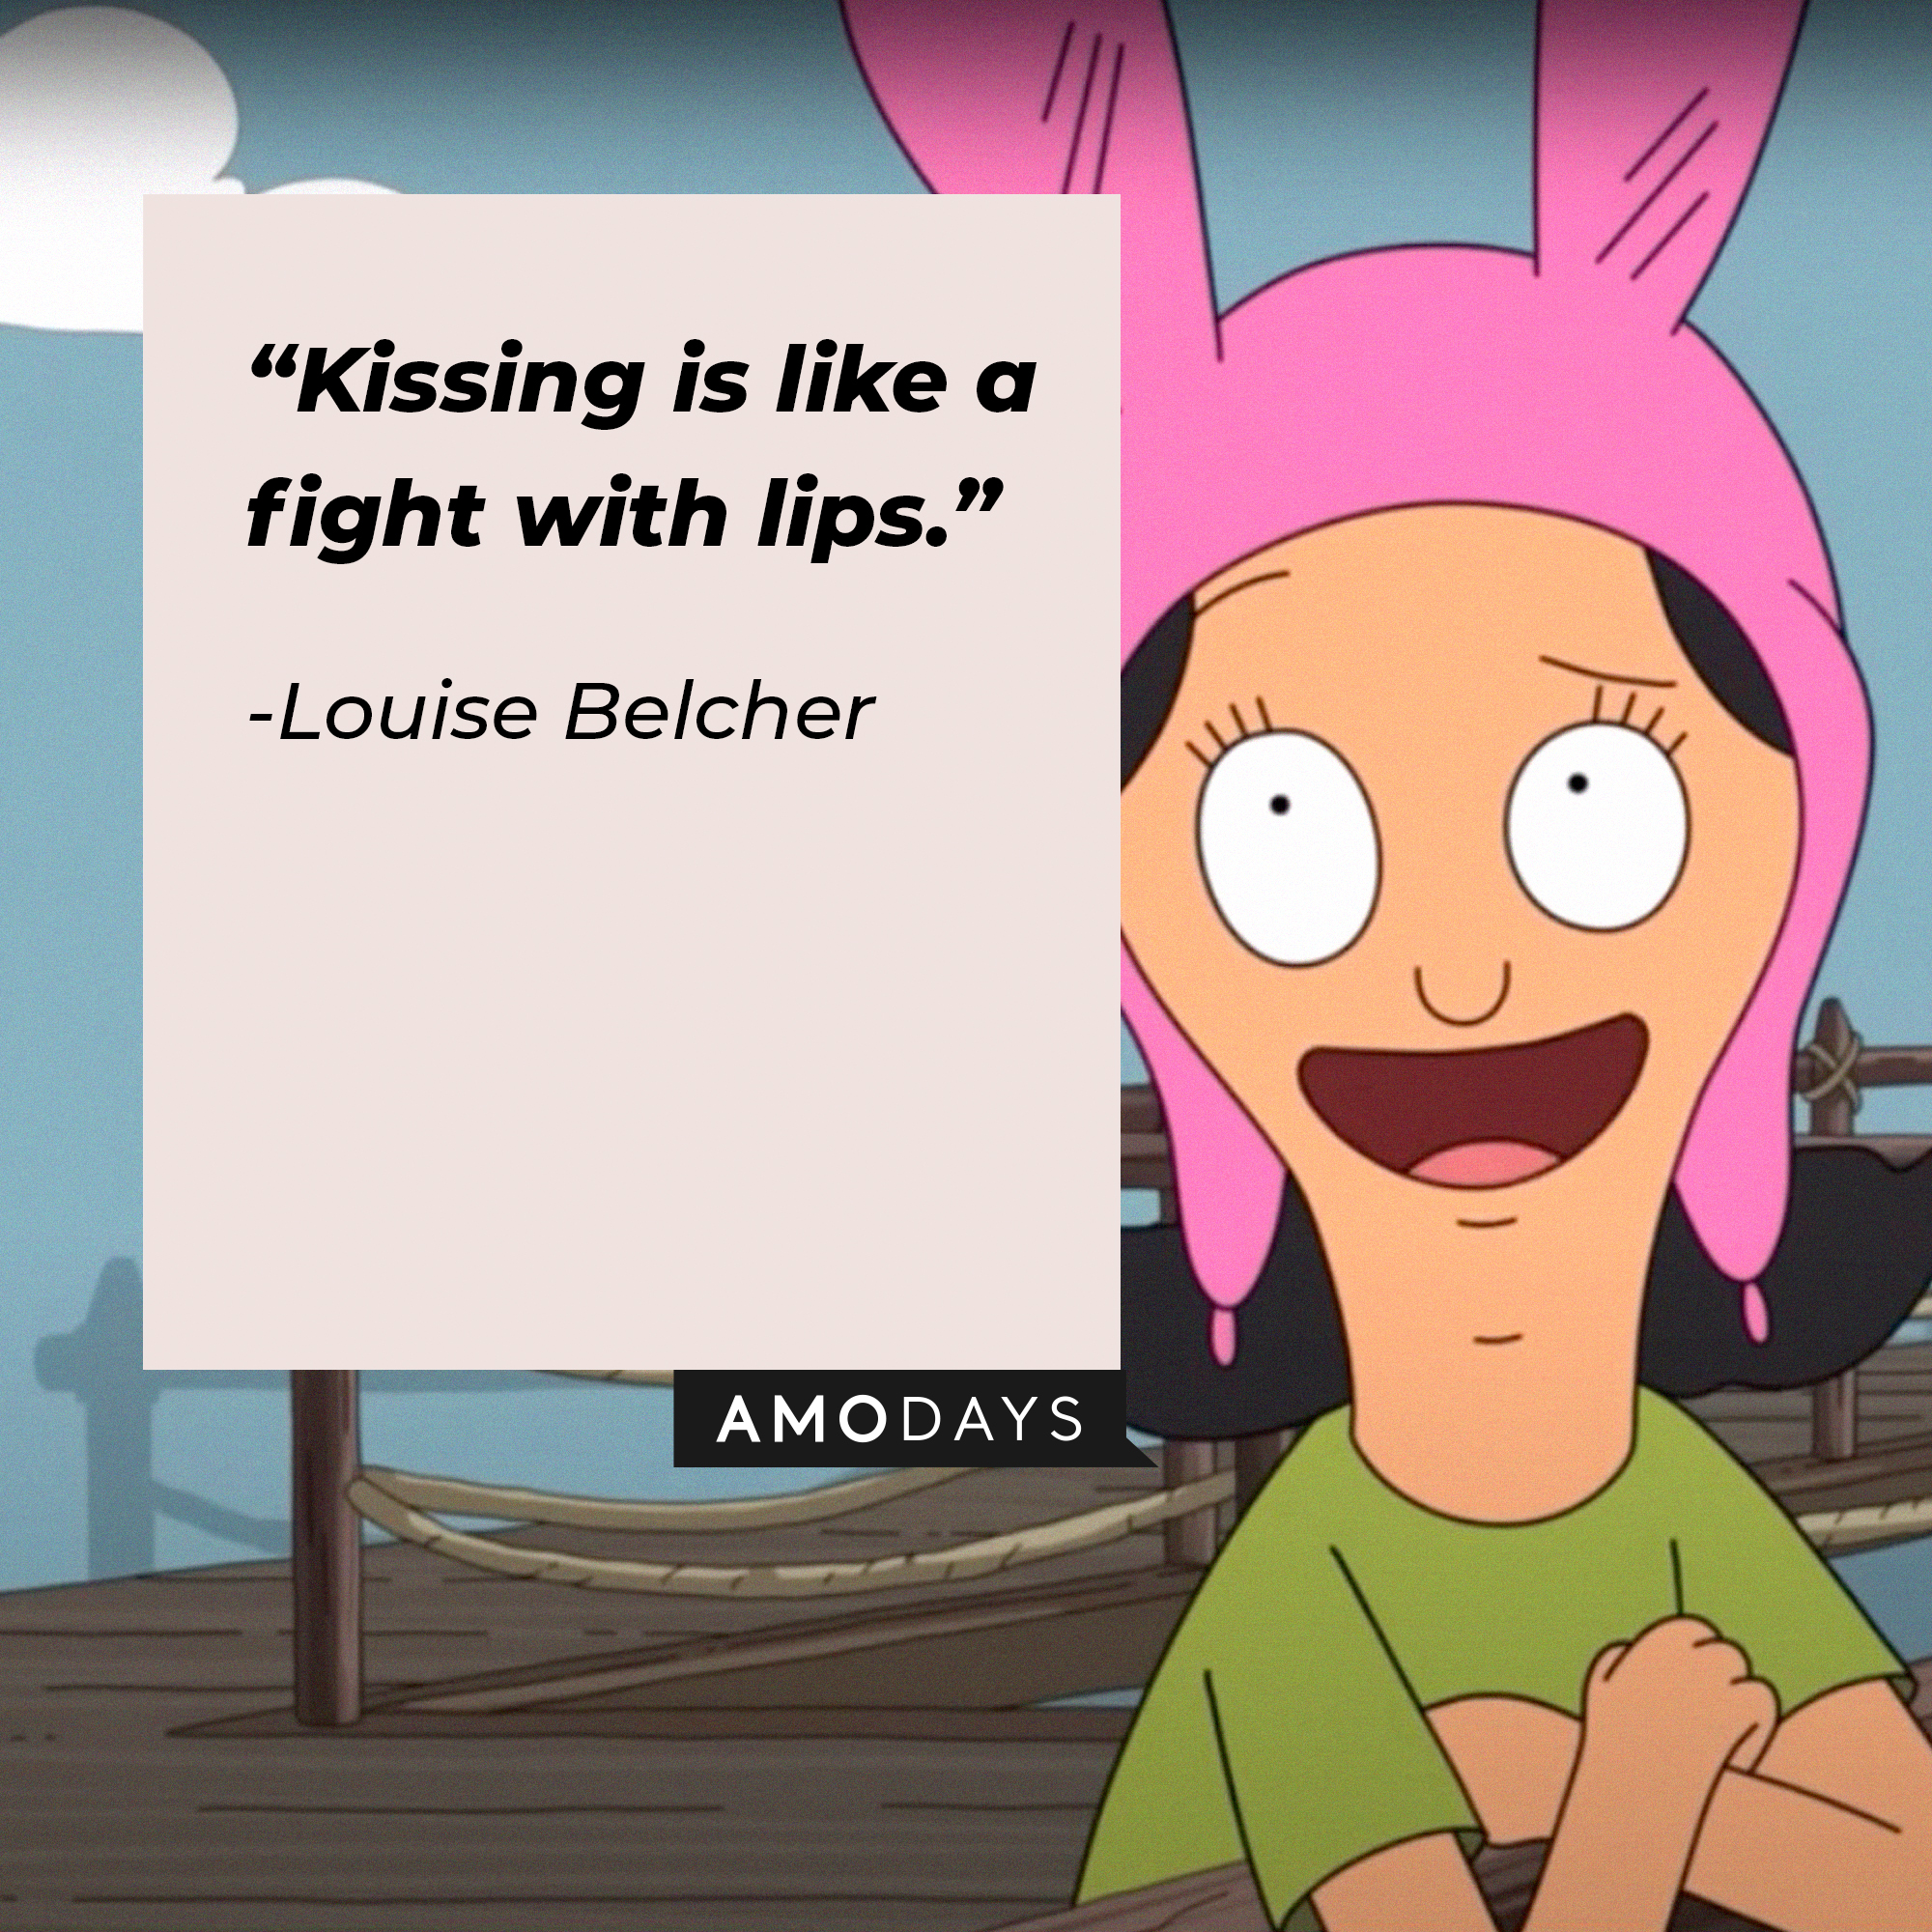 An image of Louise Belcher with her quote: "Kissing is like a fight with lips." |  Source:  facebook.com/BobsBurgers